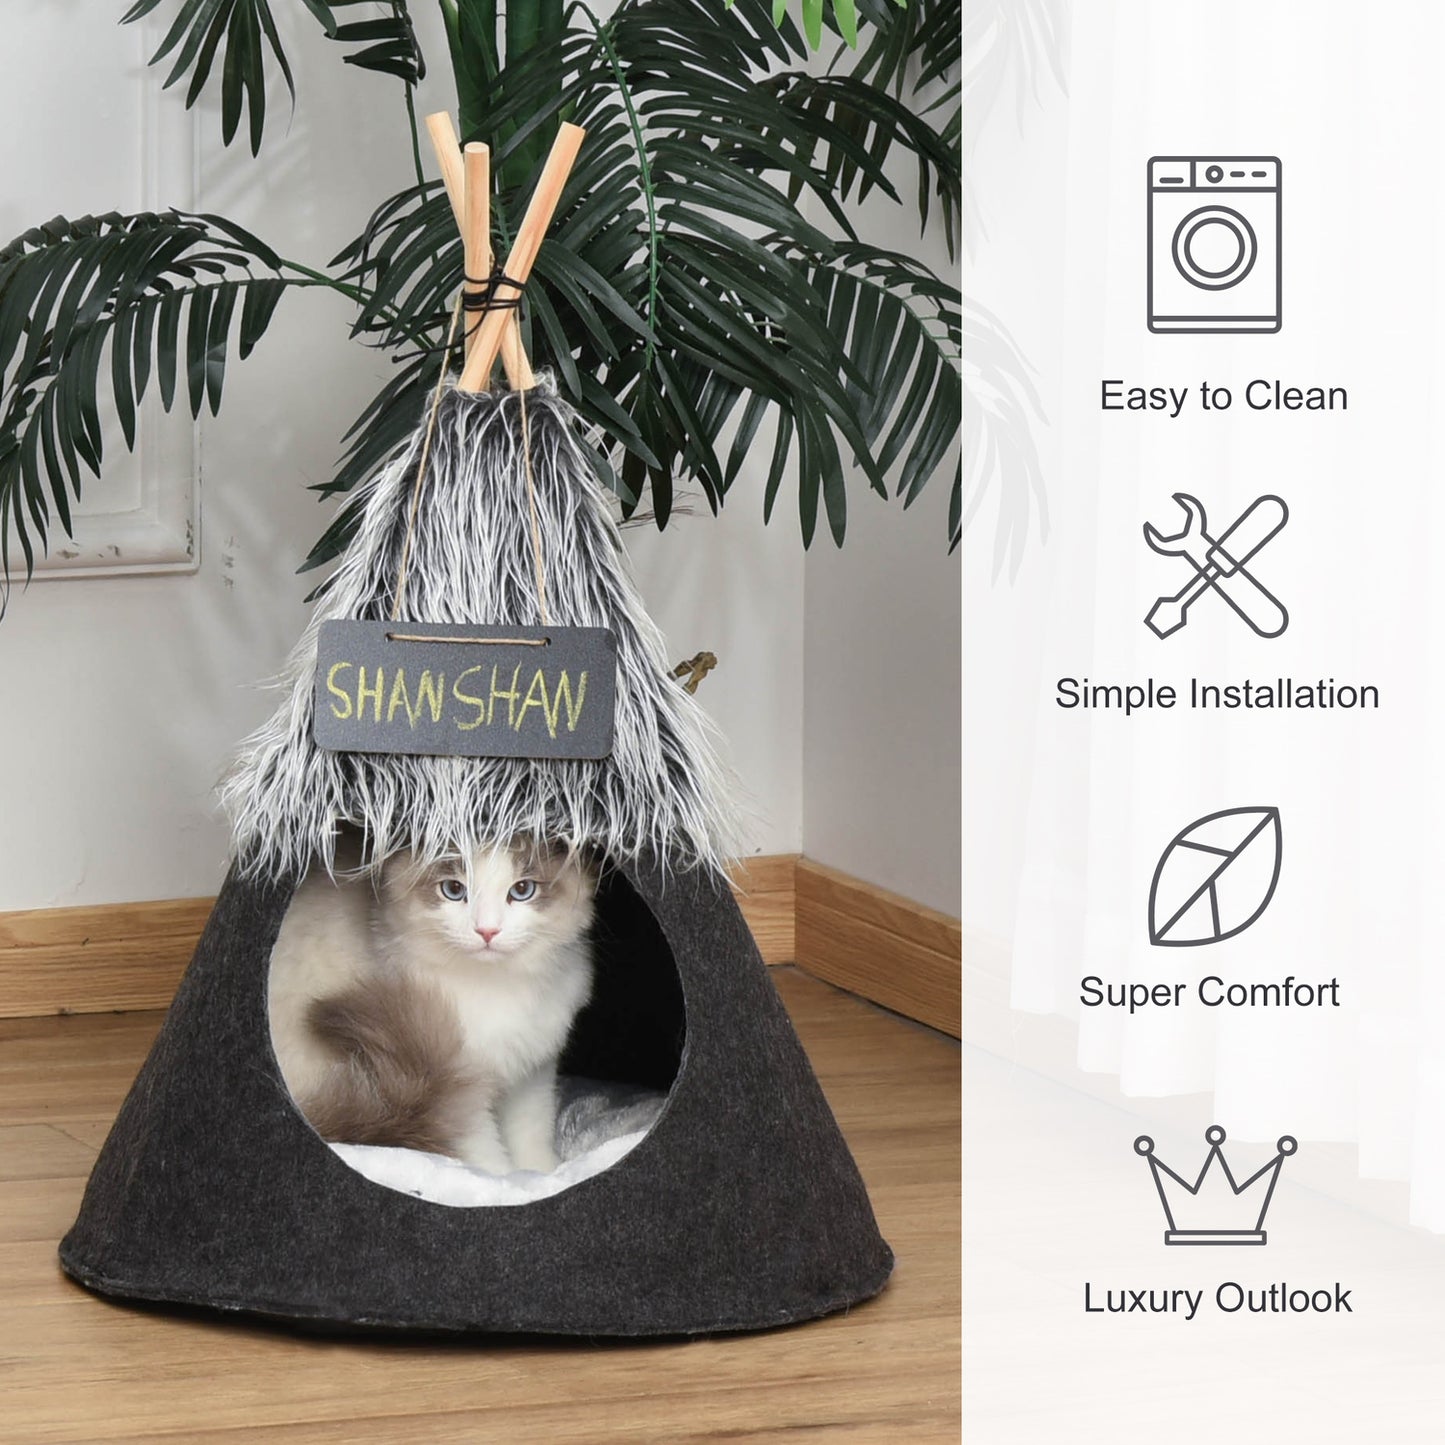 Pawhut Pet Teepee Tent Cat Bed Dog House with Thick Cushion Chalkboard for Kitten and Puppy up to 13Lbs 28Inch Grey